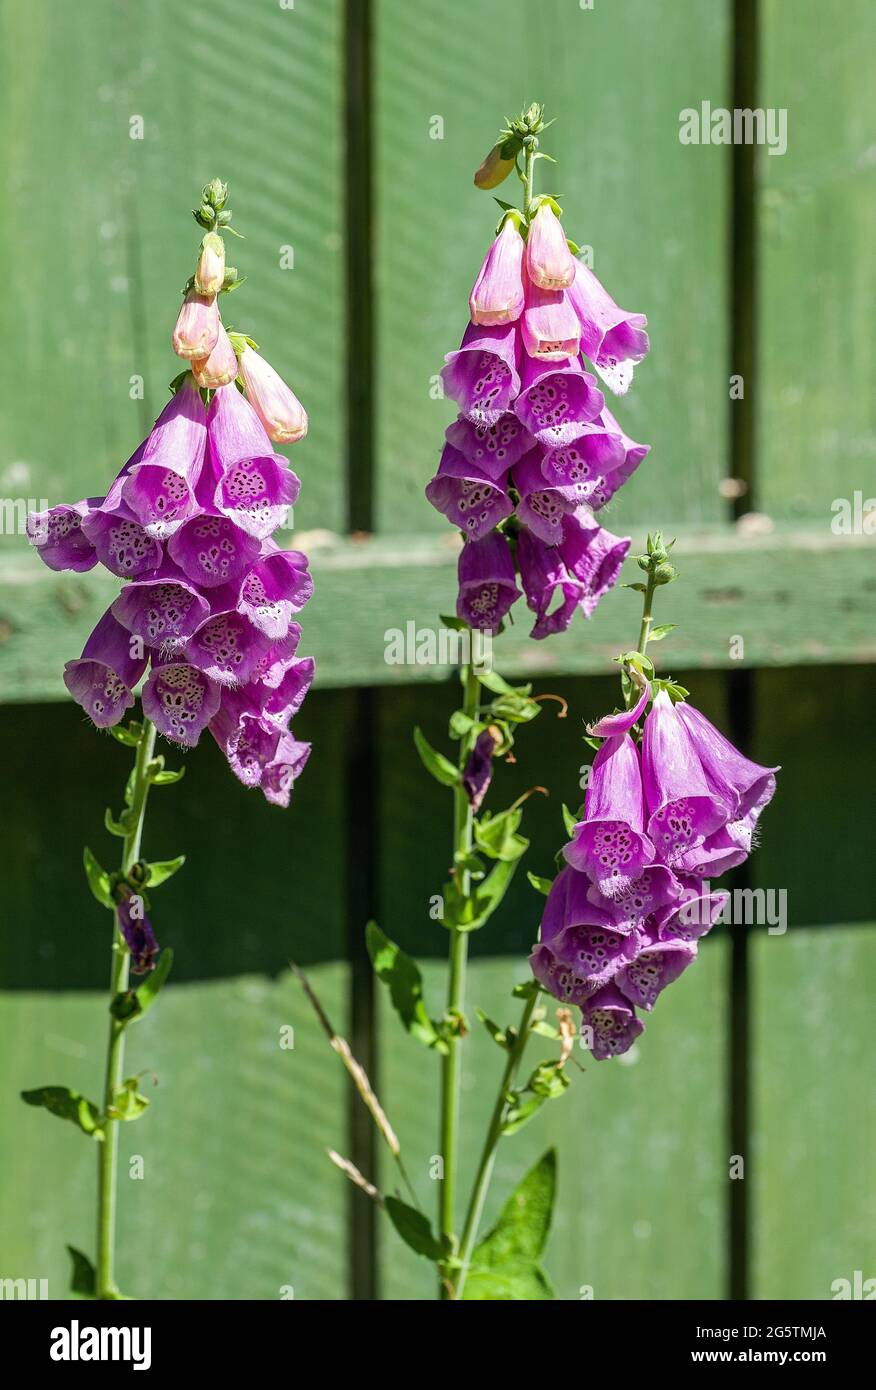 Flowering foxglove plant with florets partly opened against a green wall background Stock Photo